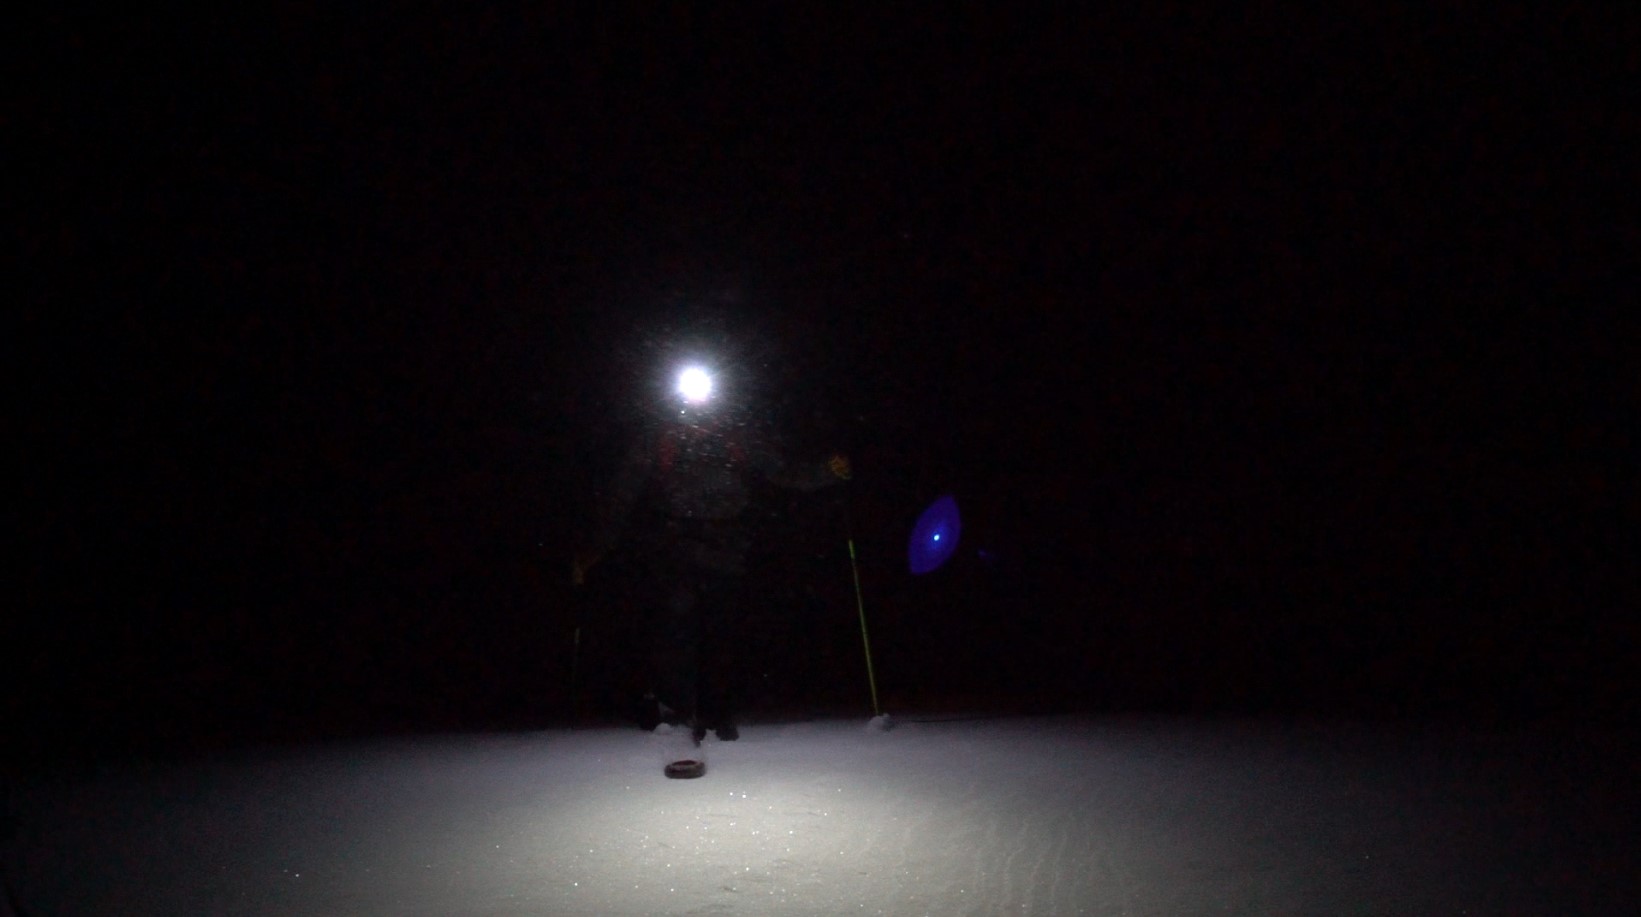 night time photo of skier with a headlamp